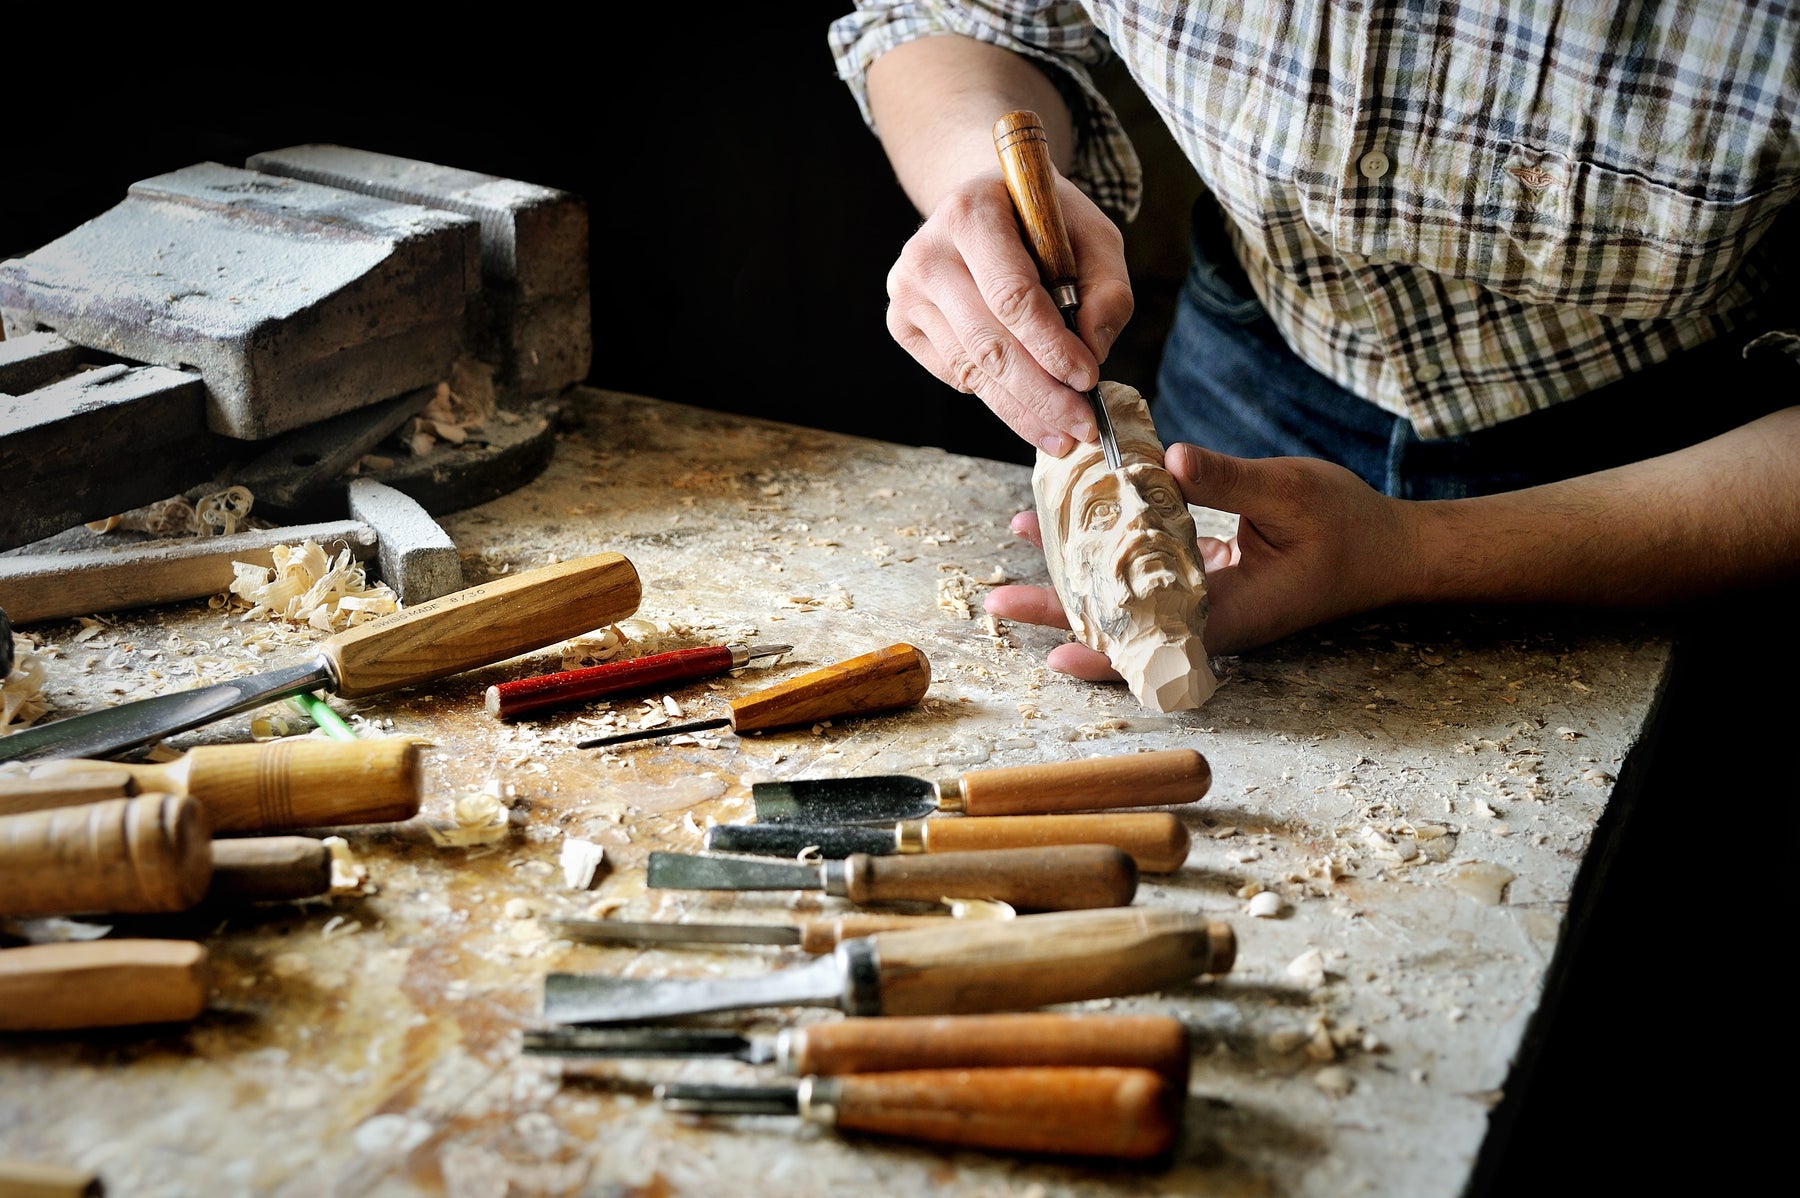 The beginner's guide to wood carving tools